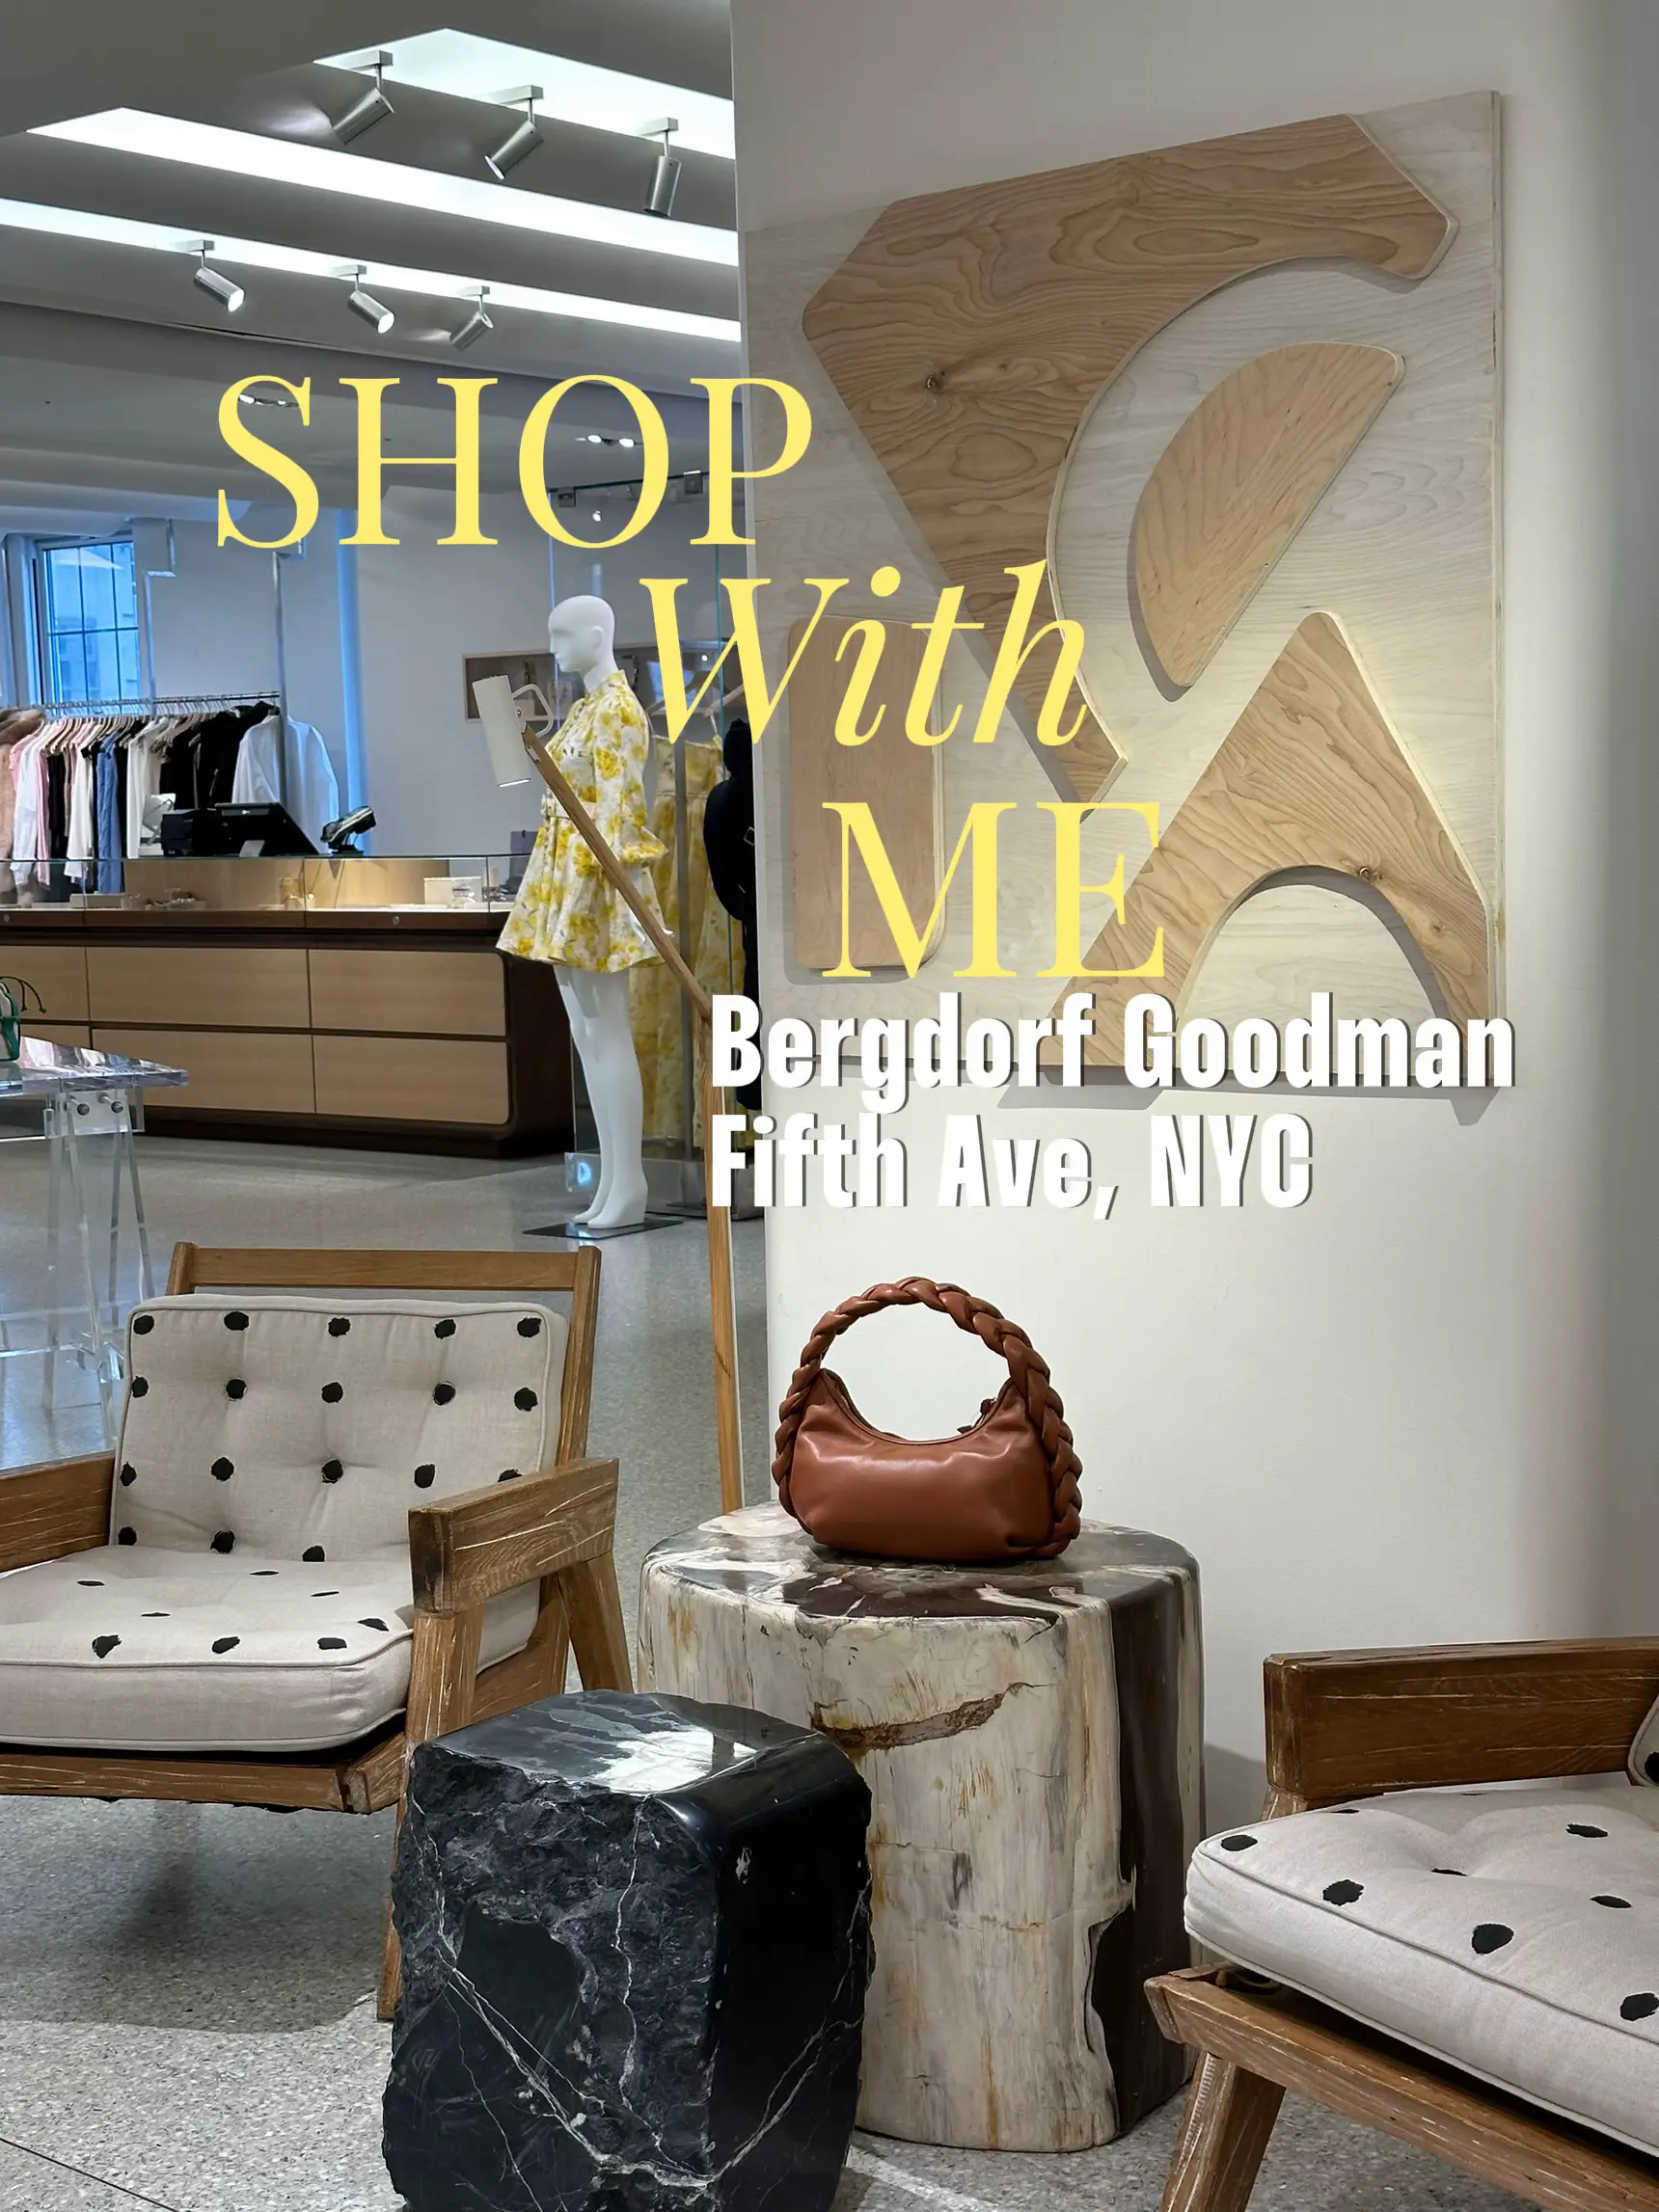 Bergdorf Goodman - Just When You Can't Love NYC More